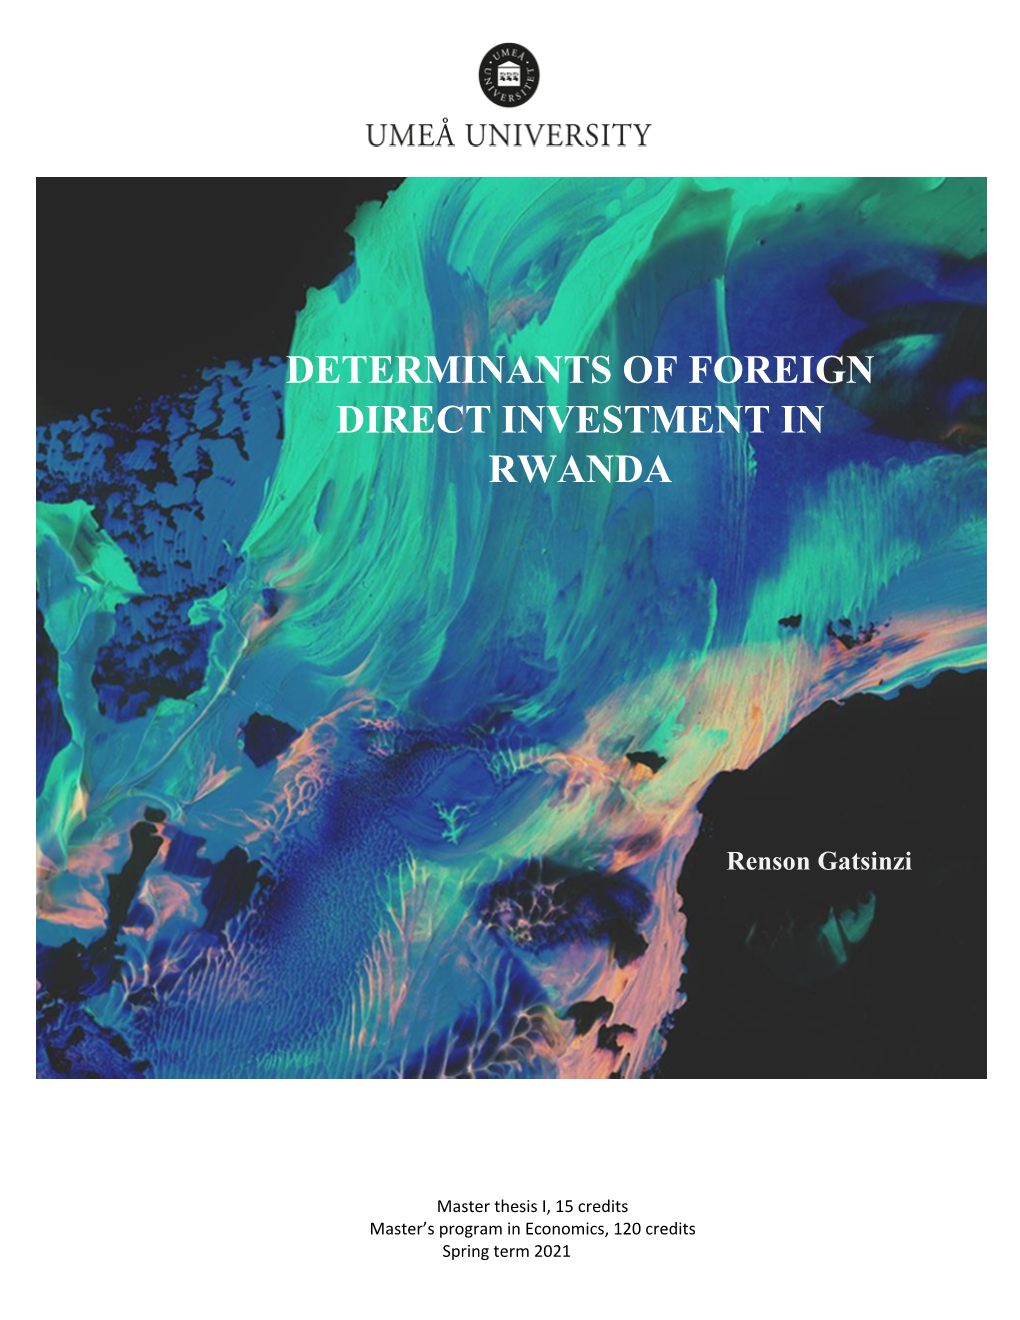 Determinants of Foreign Direct Investment in Rwanda